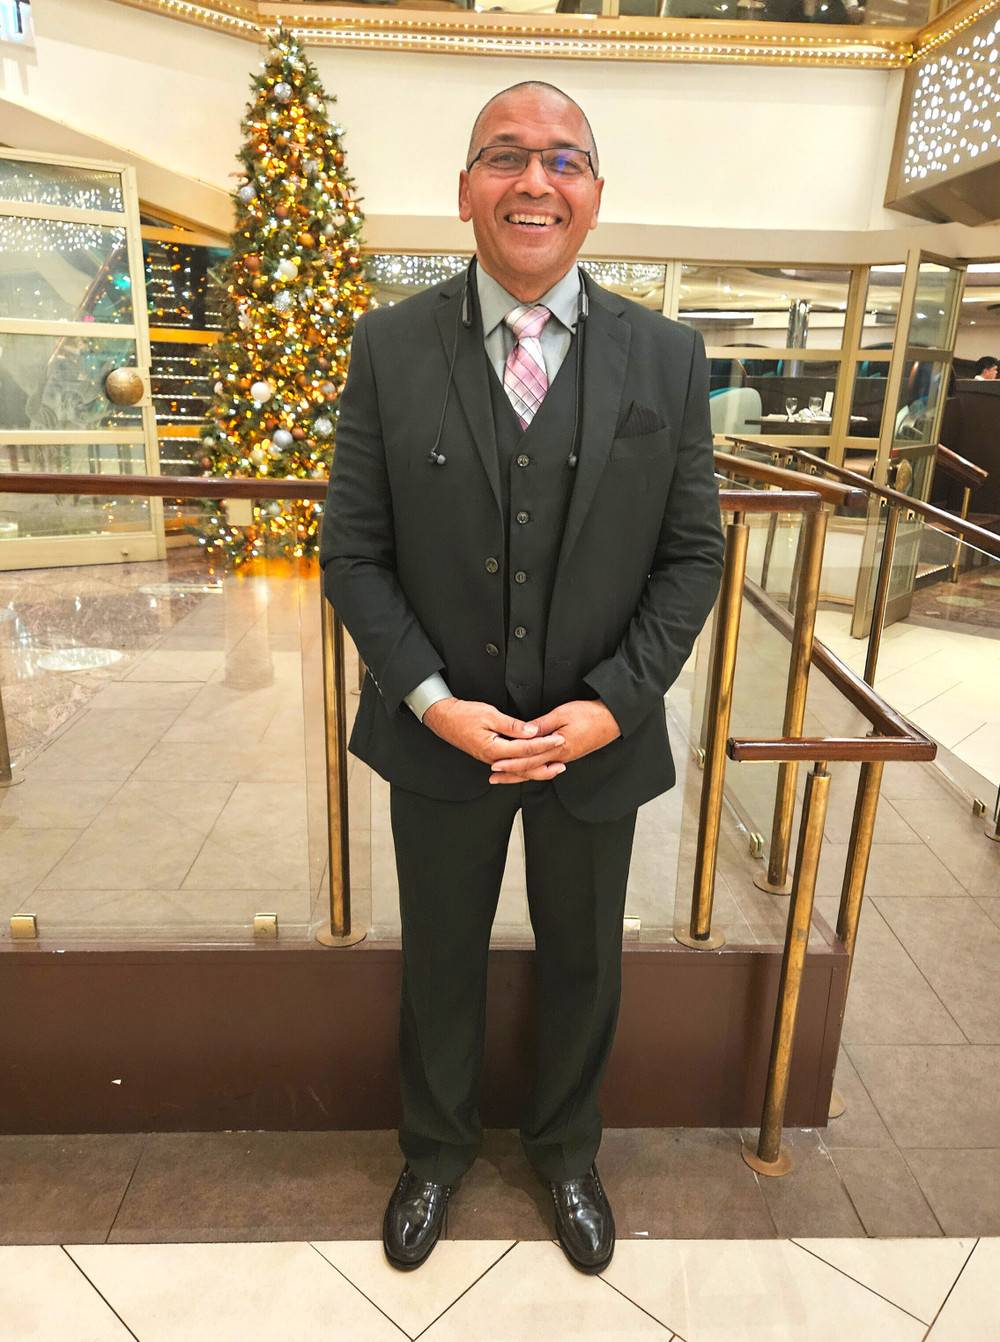 A man in a suit stands smiling in front of a gold interior space with a Christmas tree in the background.